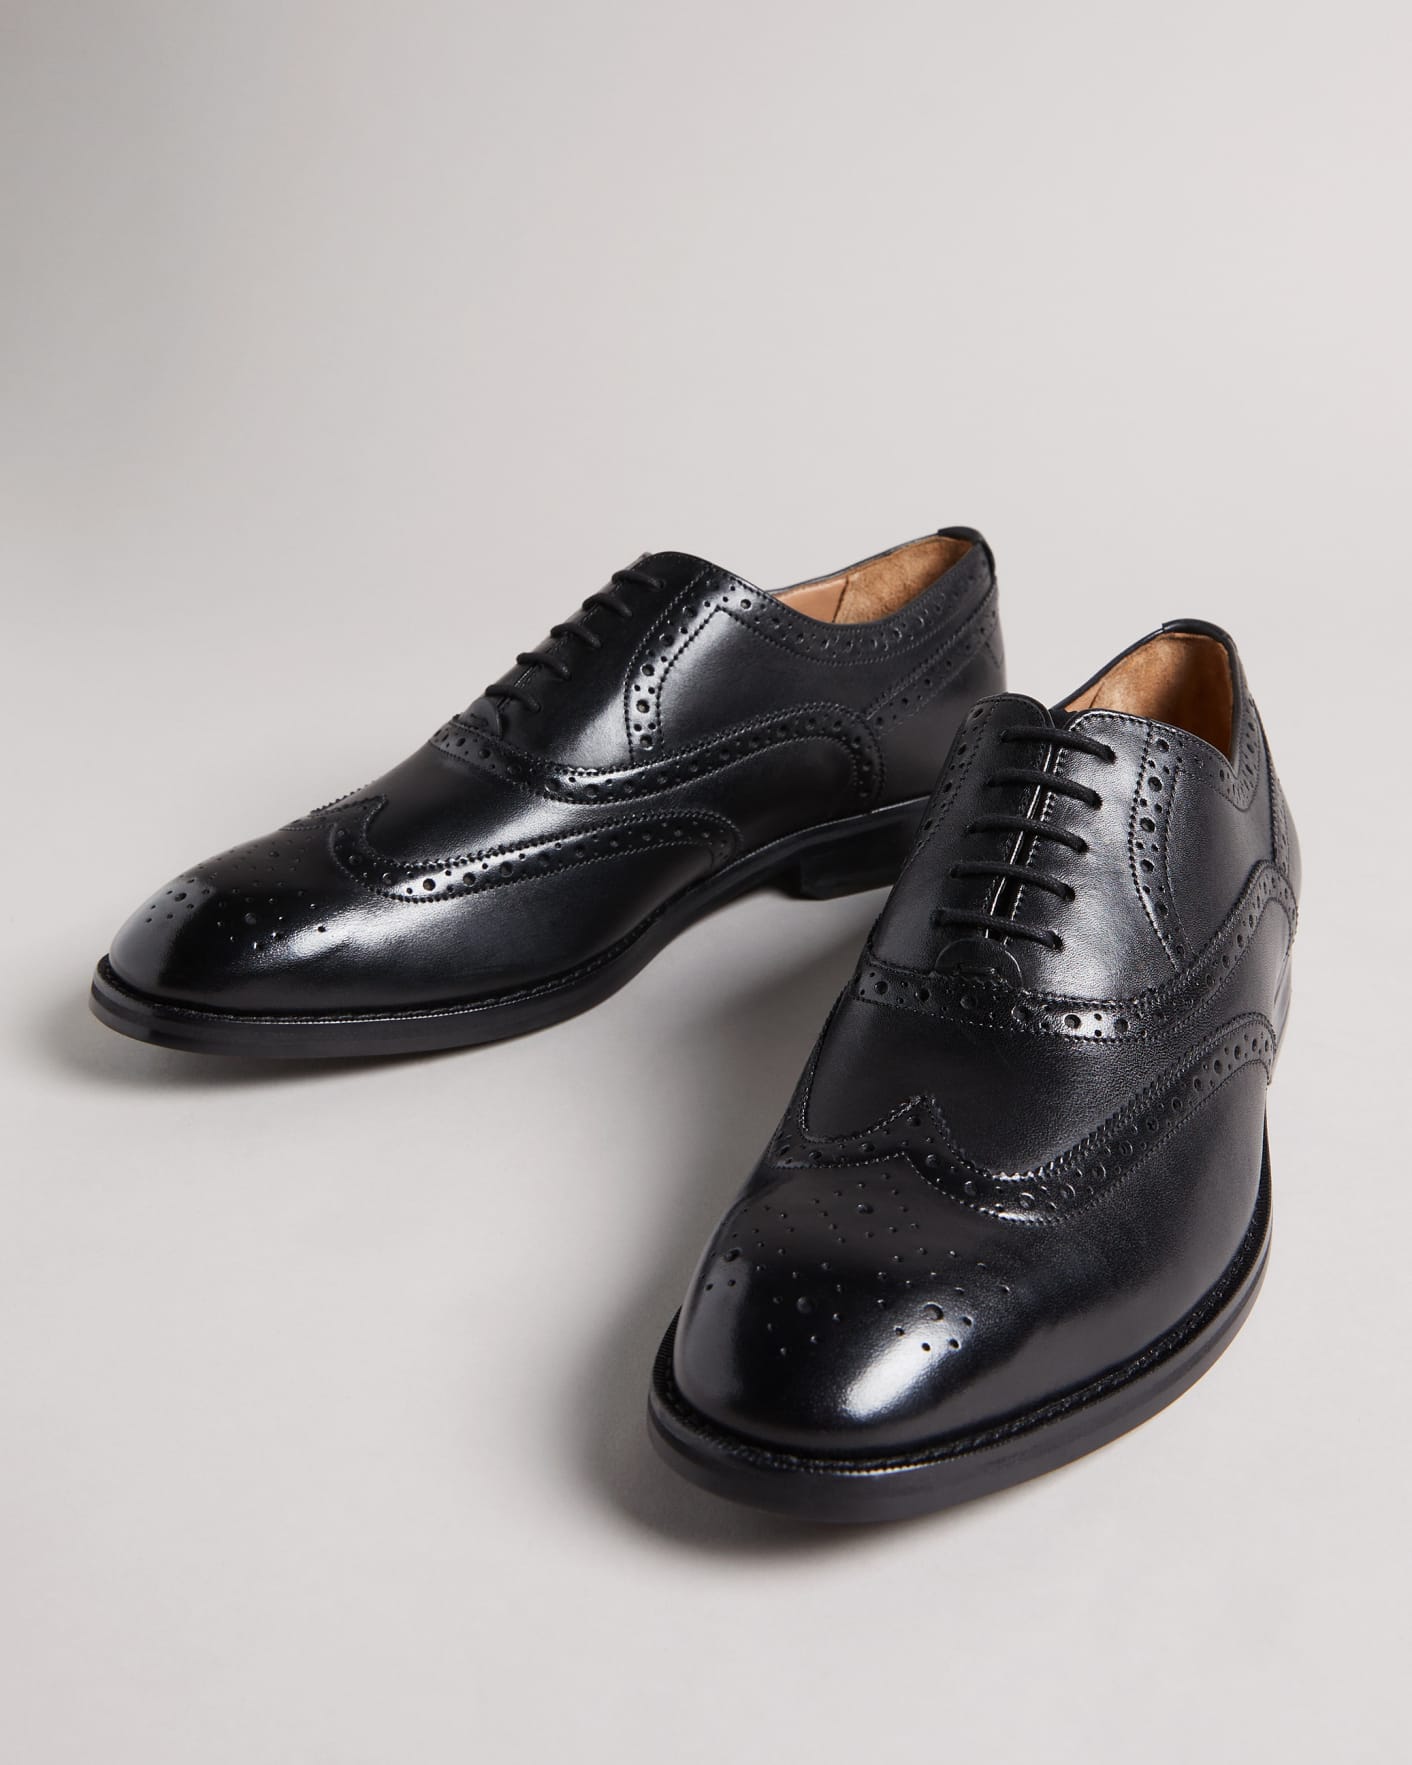 Black Formal Leather Brogue Shoes Ted Baker